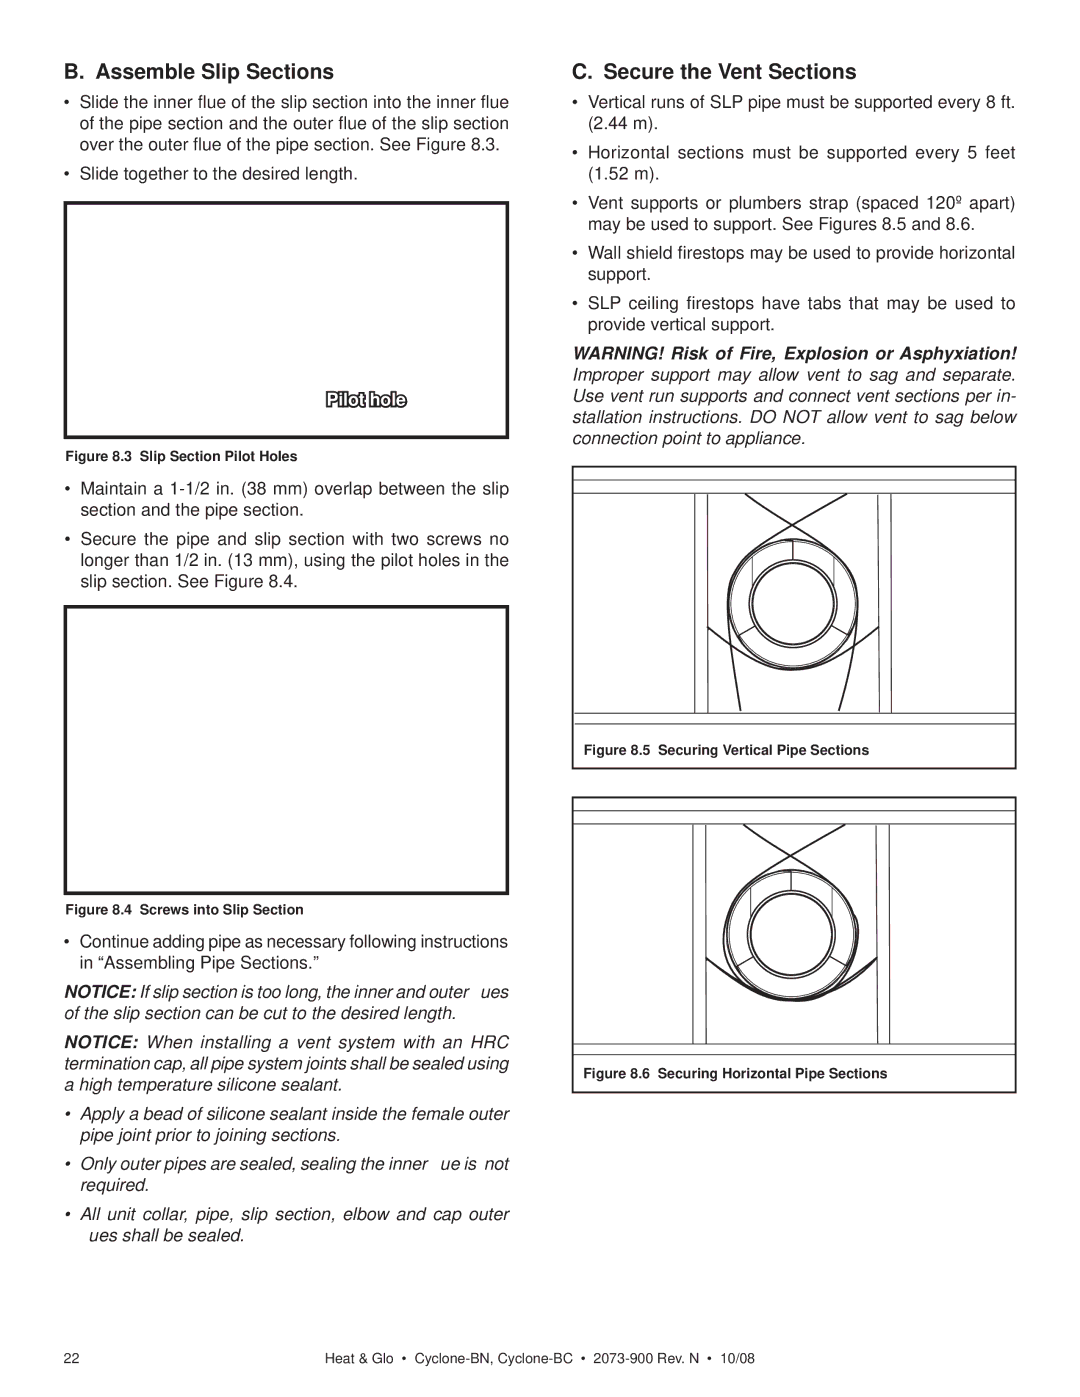 Hearth and Home Technologies Cyclone-BC, Cyclone-BN owner manual Assemble Slip Sections, Secure the Vent Sections 